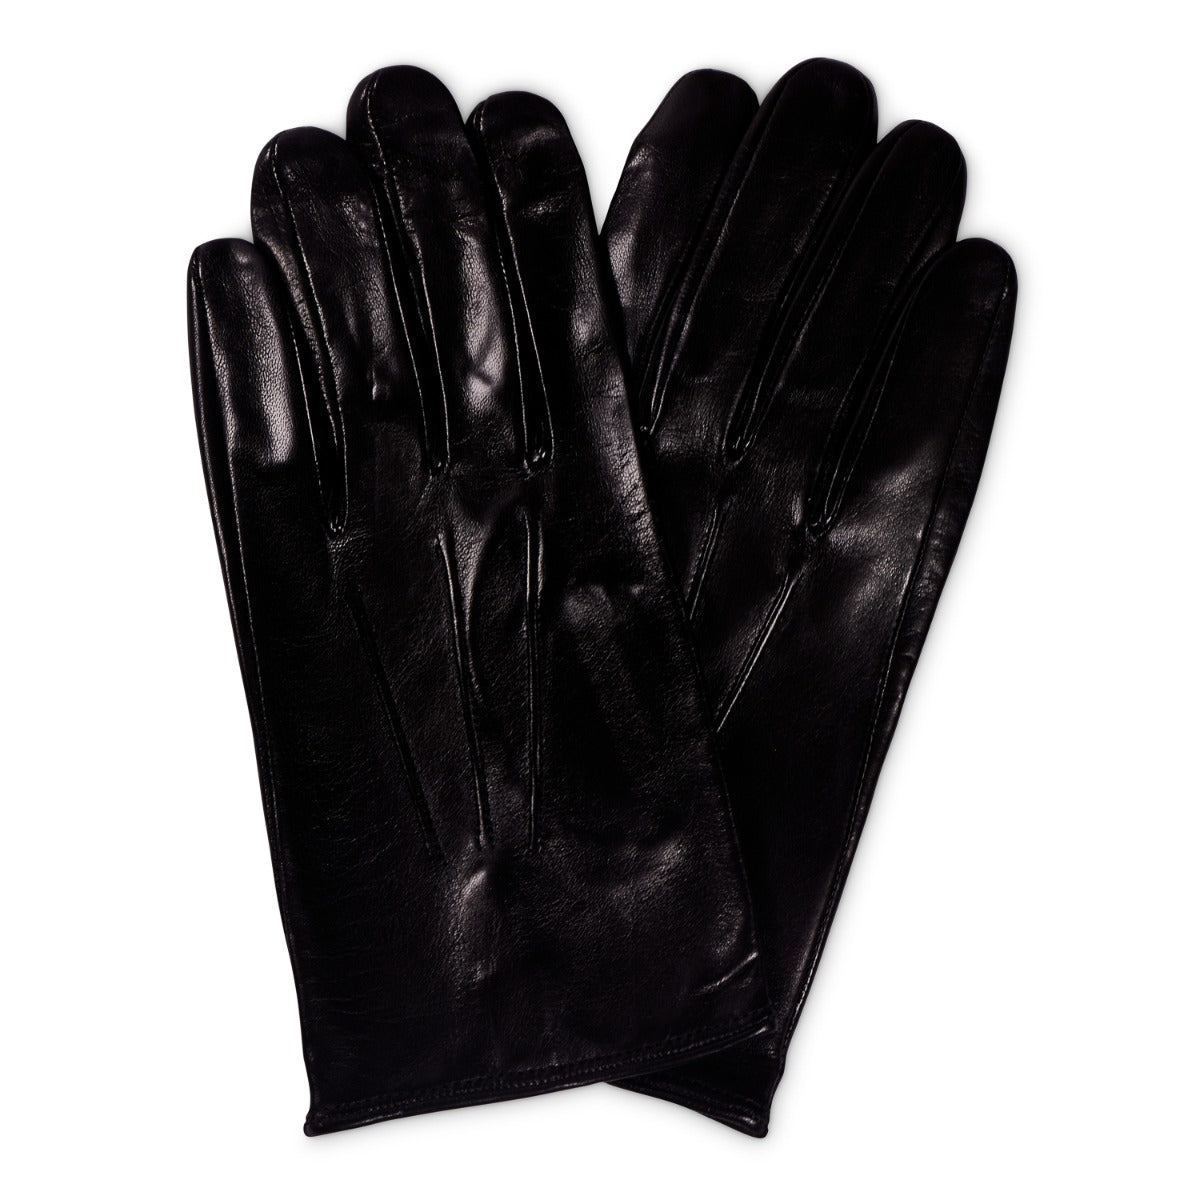 Sovereign Grade Black Nappa Leather Gloves, Silk Lined